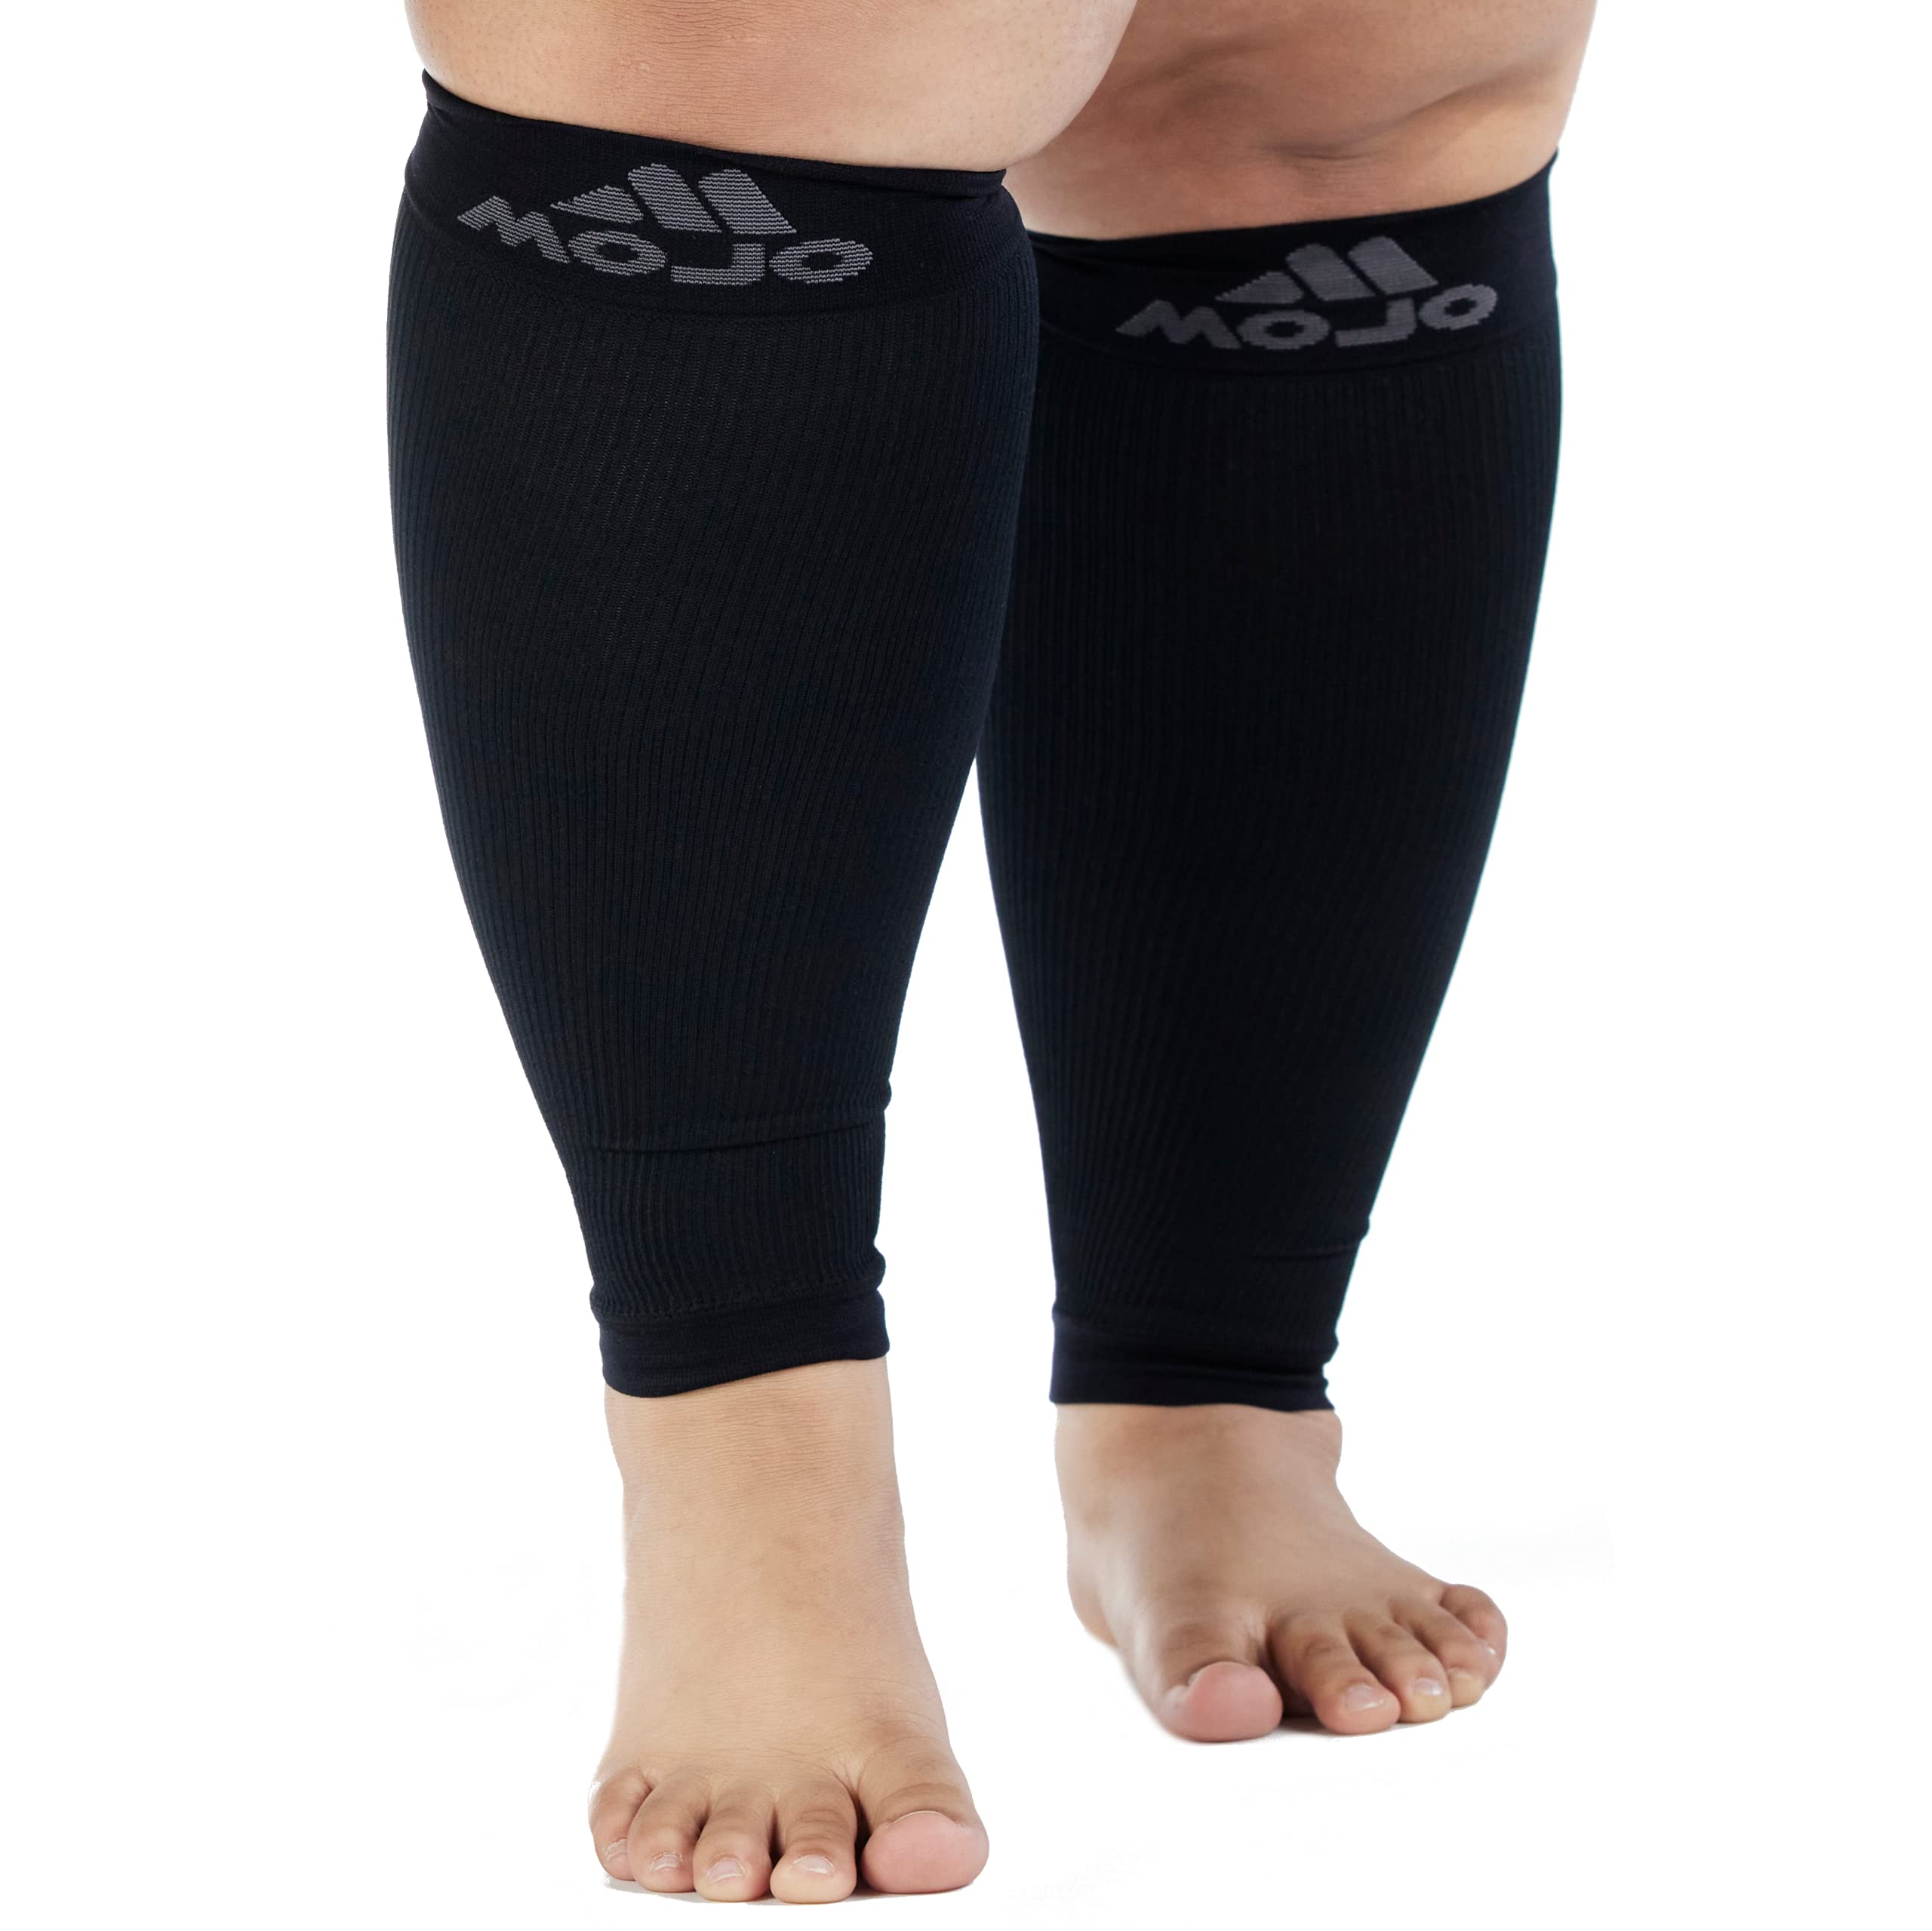 Buy Compression Under Dress Leggings for Women Up to 7XL 20-30mmHg